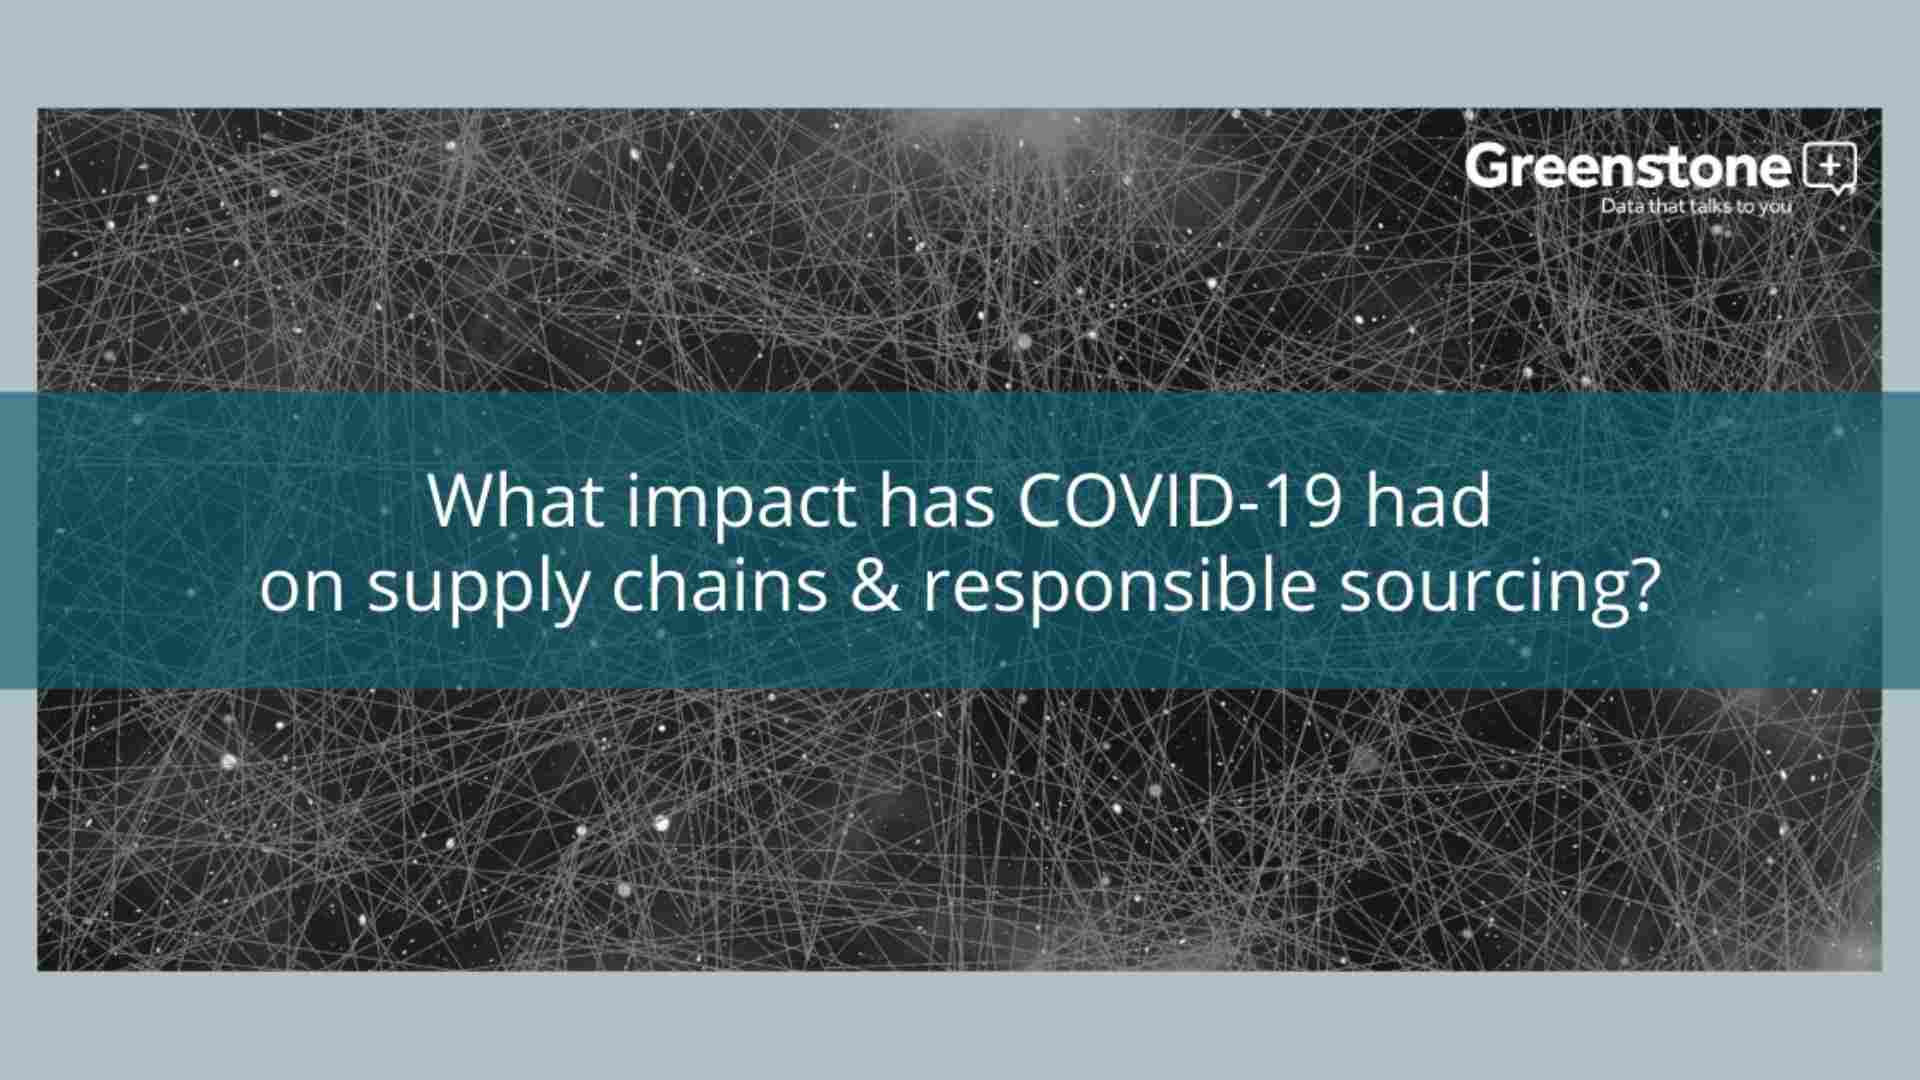 What impact has COVID-19 had on supply chains & responsible sourcing?